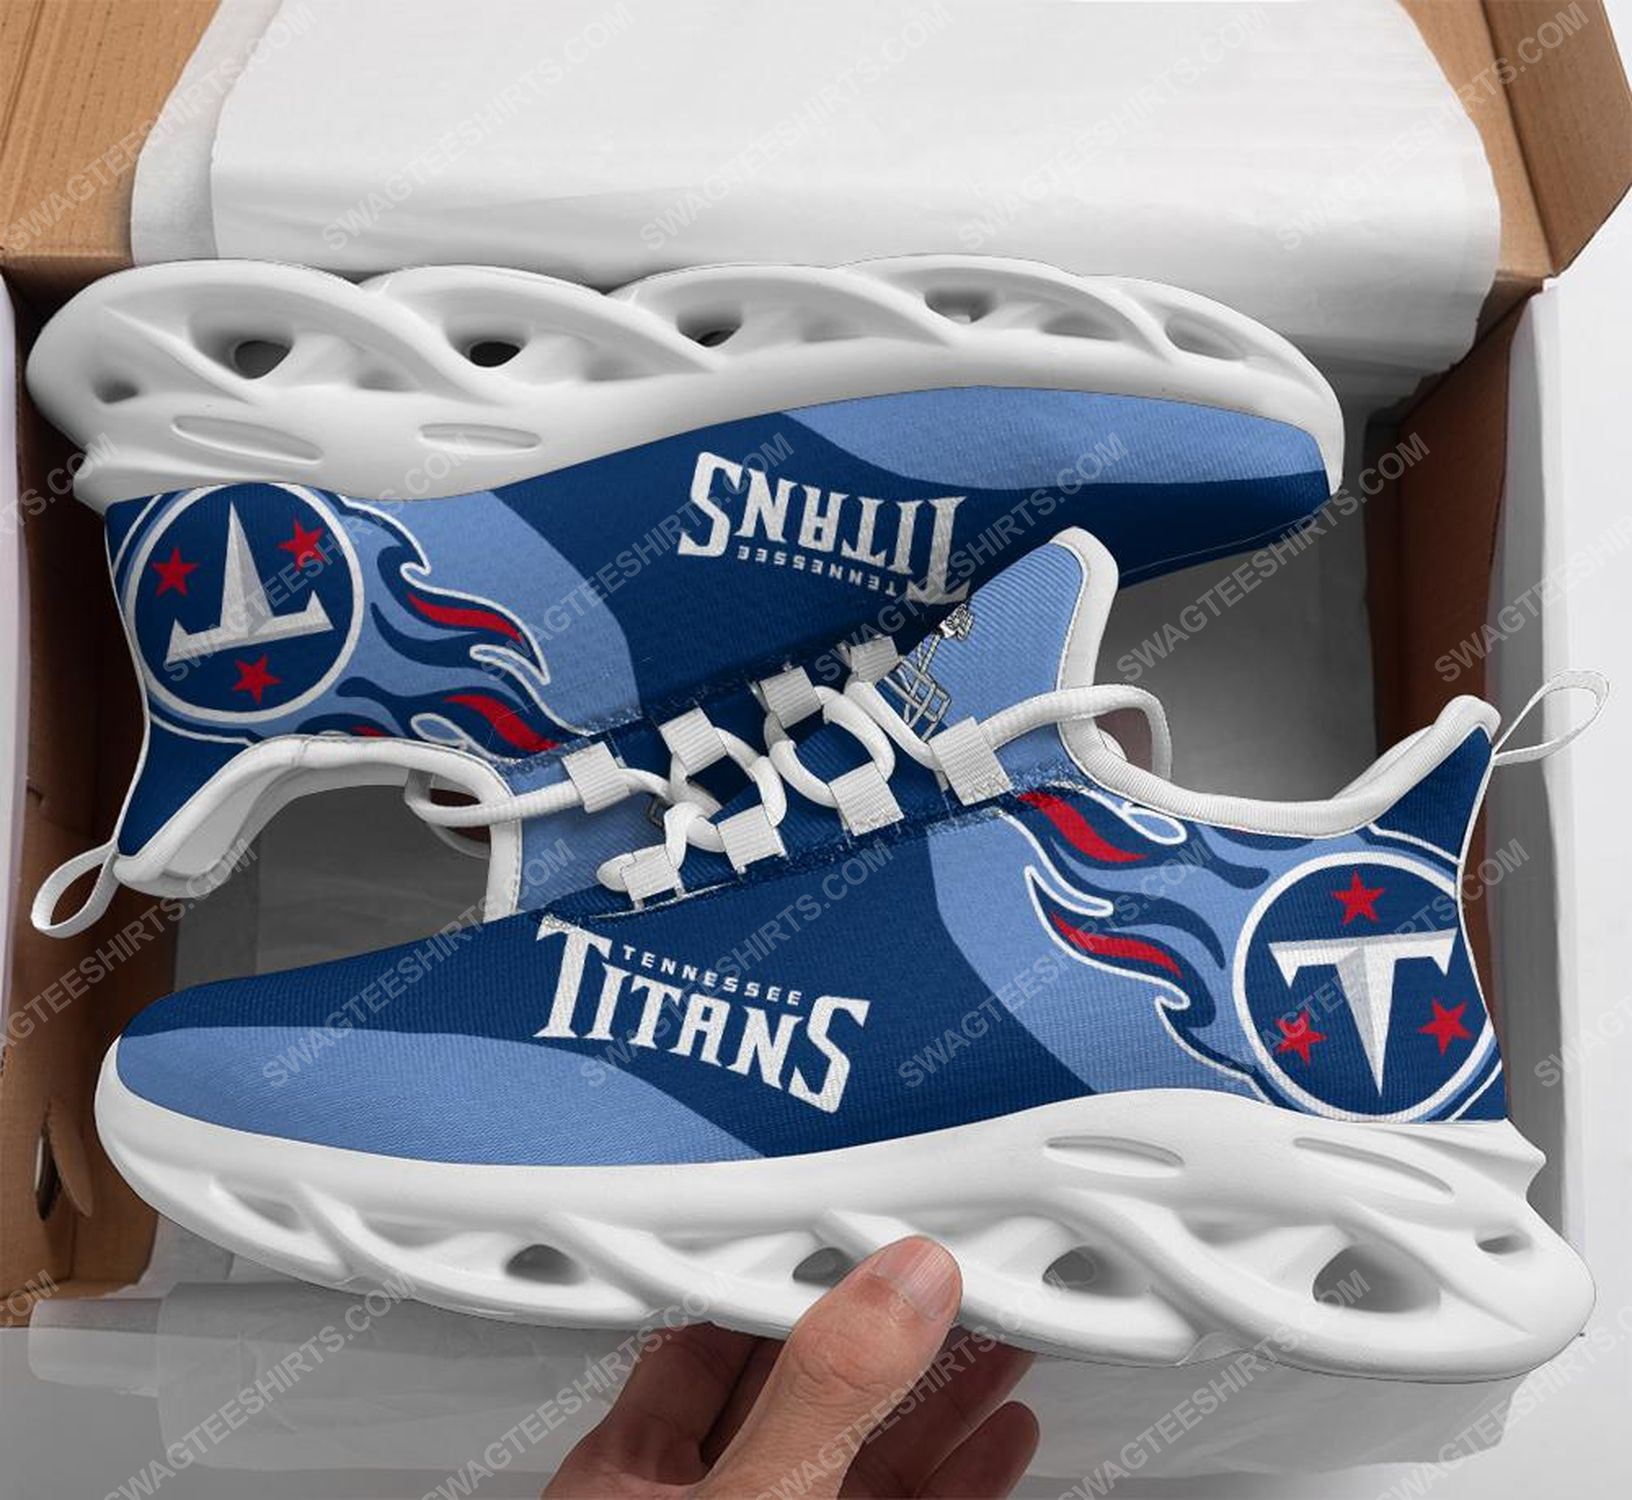 [special edition] The tennessee titans football team max soul shoes – Maria